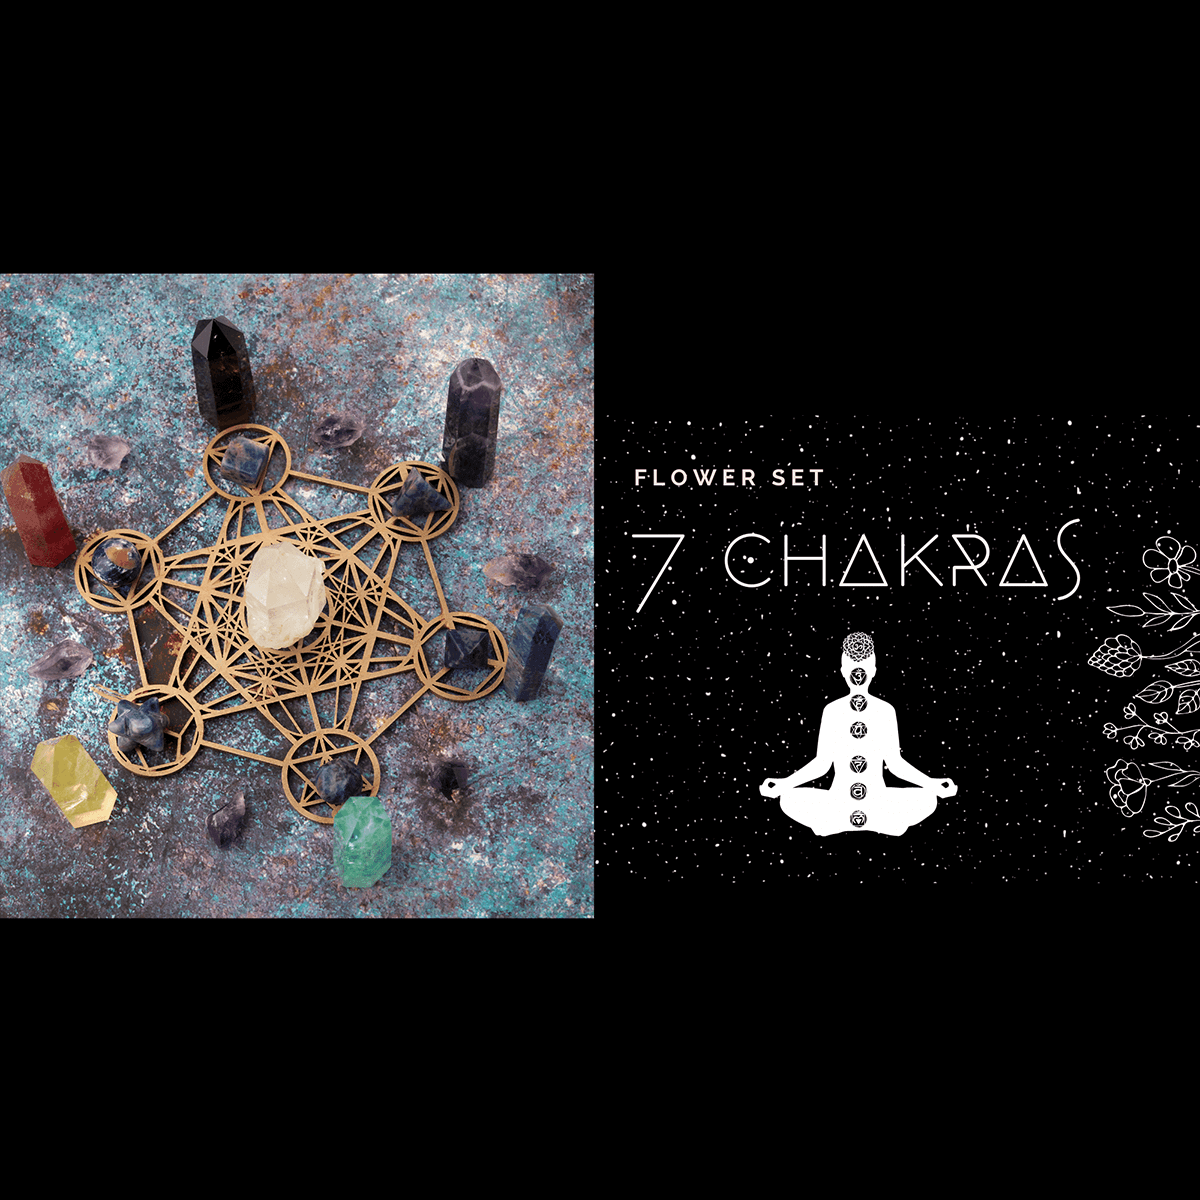 7 Chakras Flower Set at $28 only from Spiral Rain